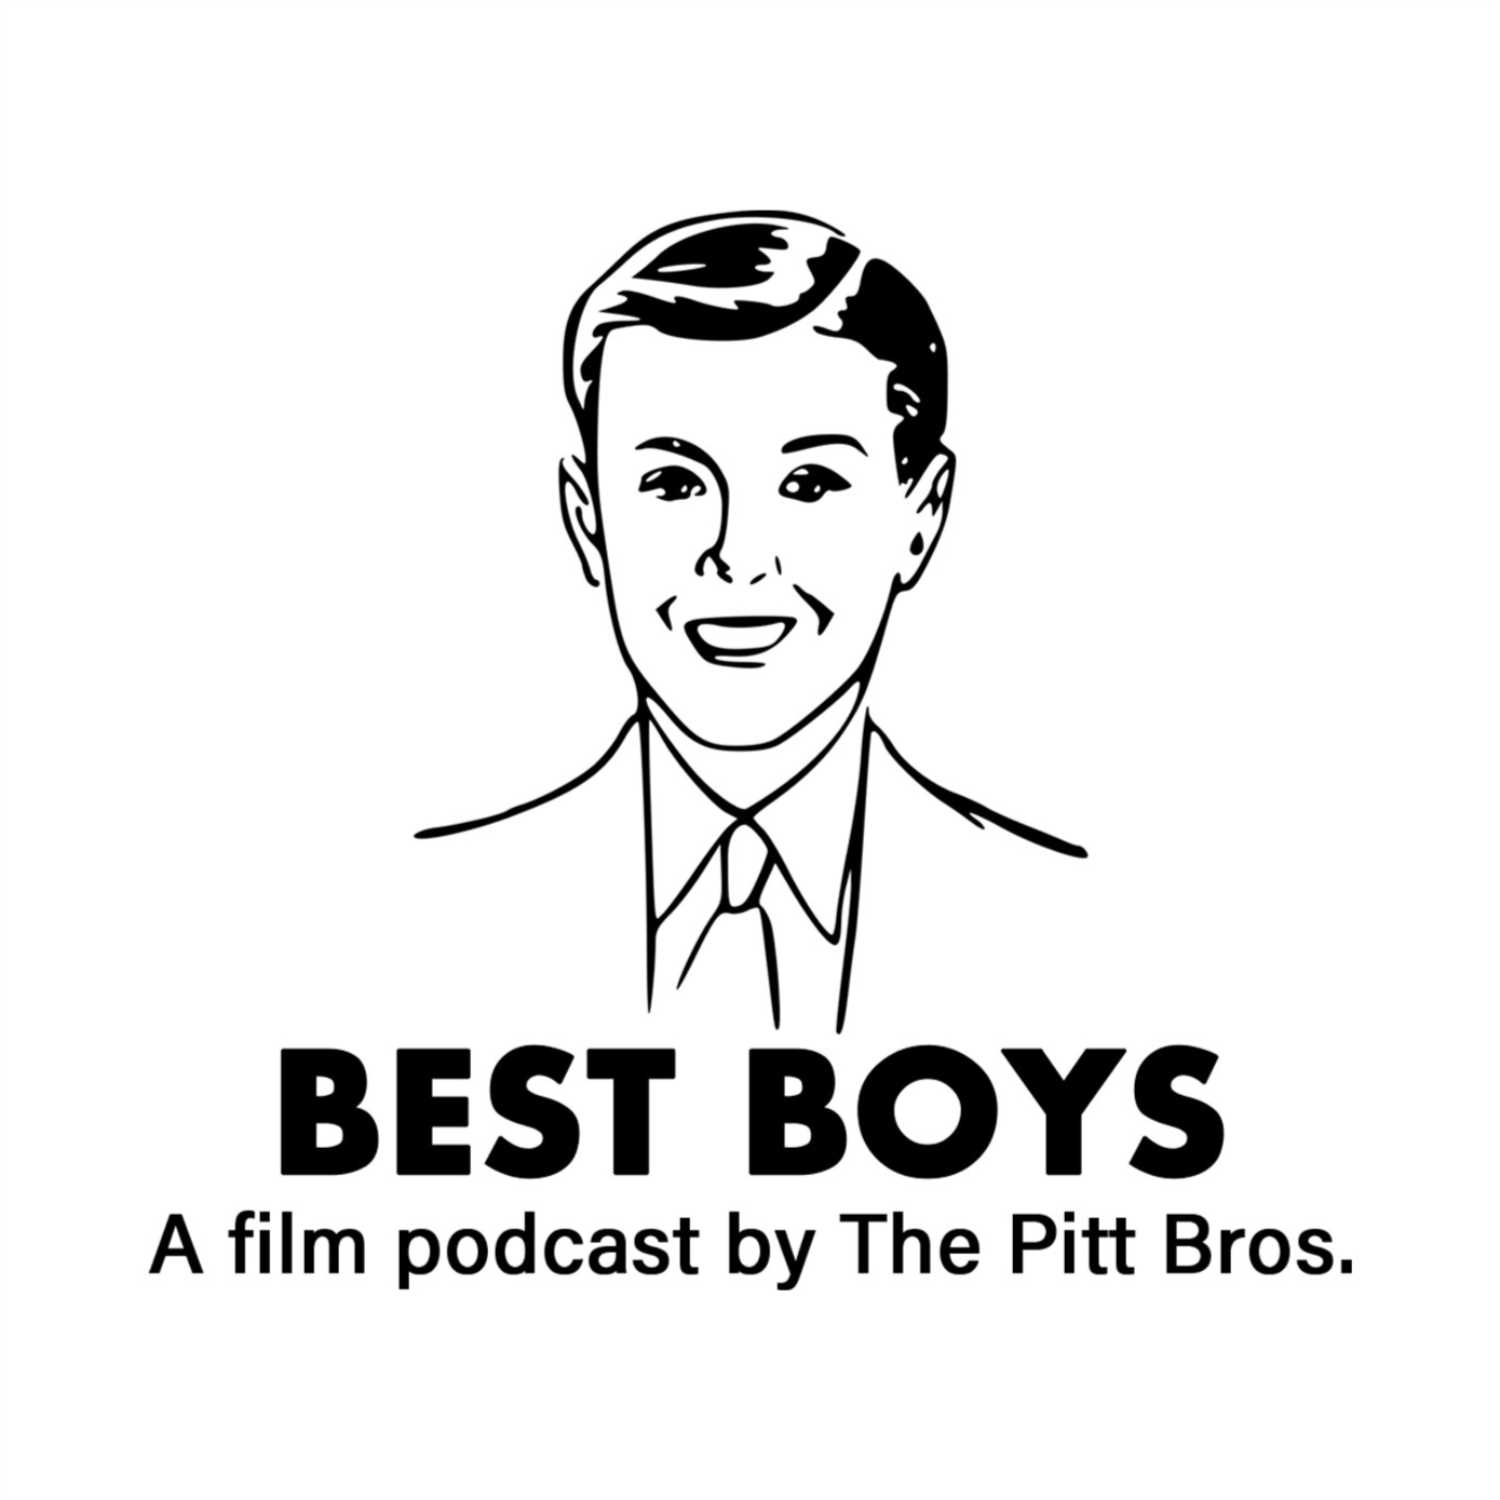 BEST BOYS: A film podcast #52 - Nope, Get Out